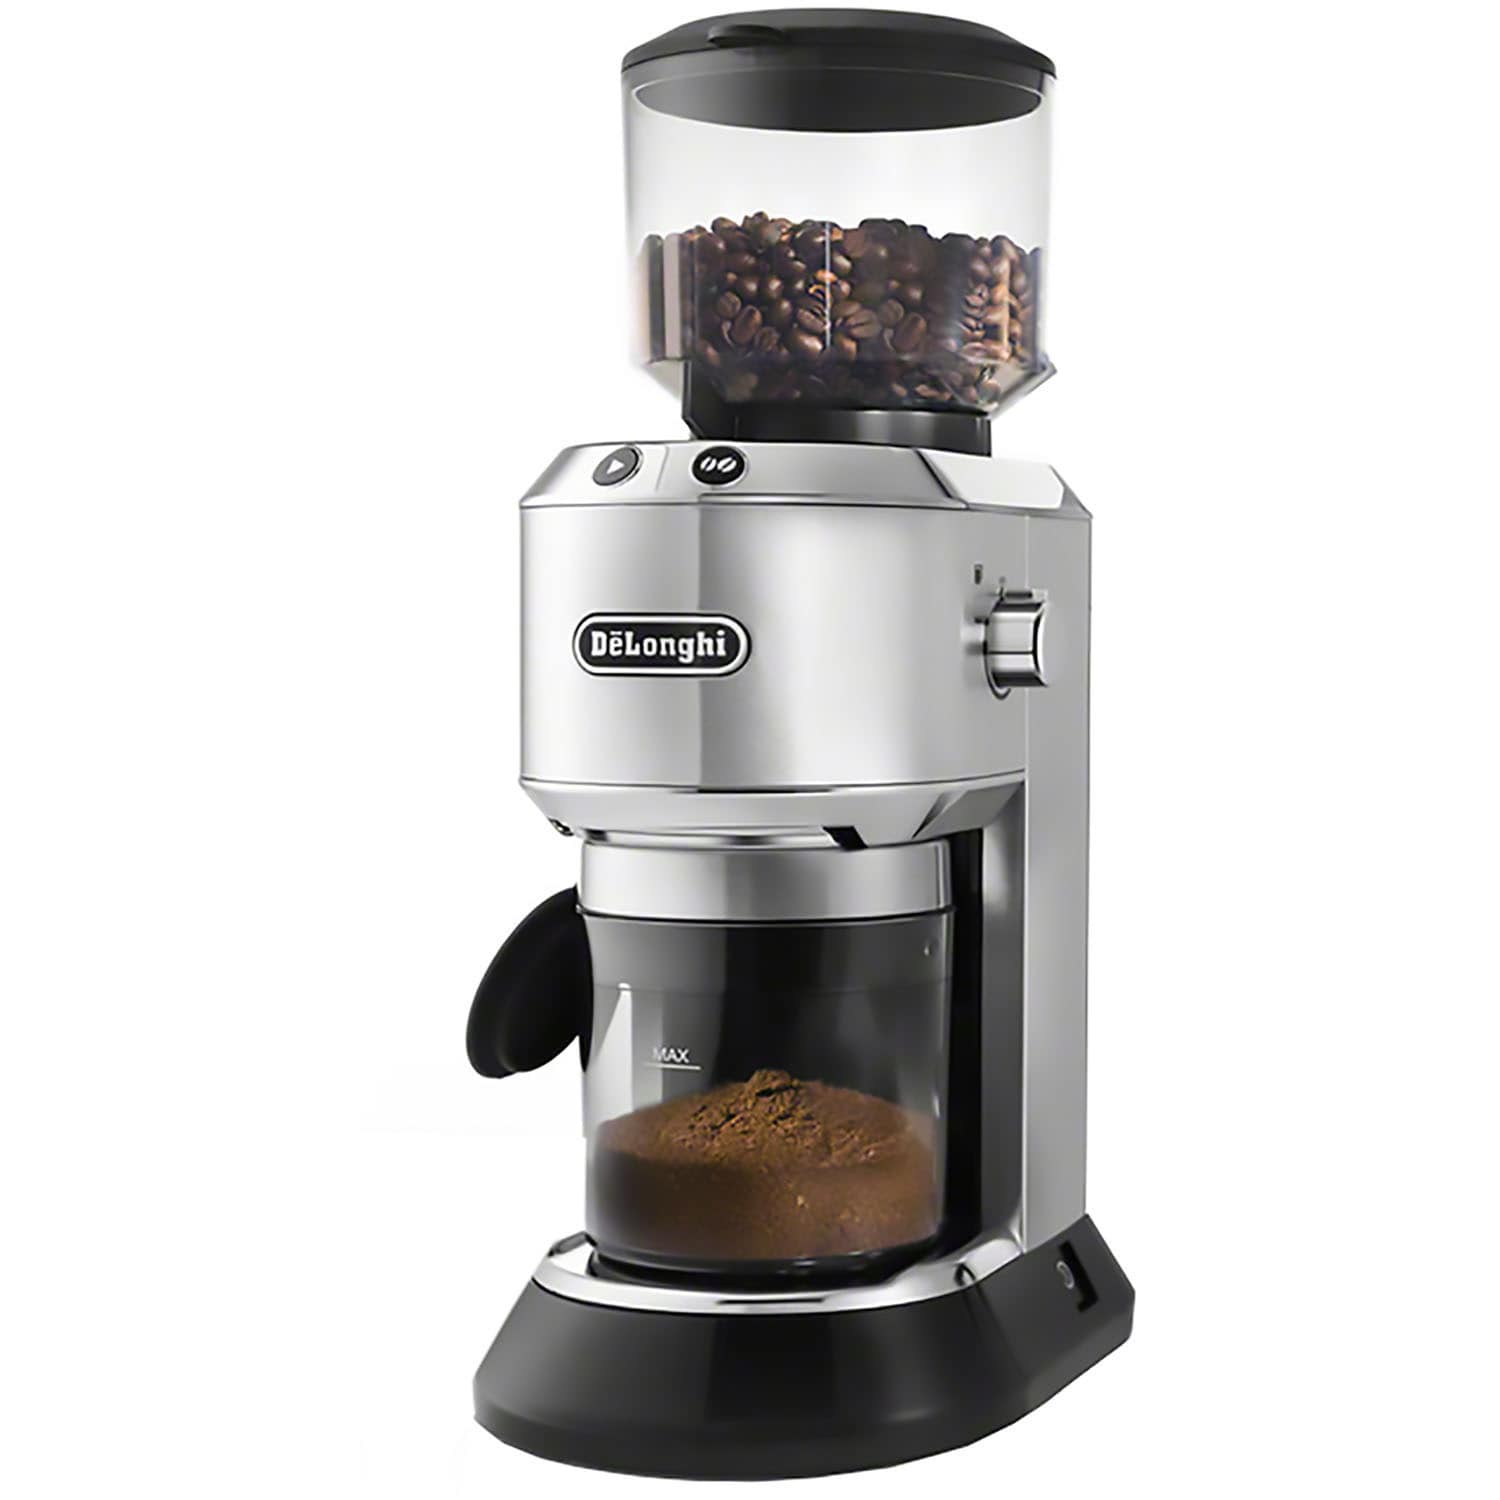 https://ak1.ostkcdn.com/images/products/13113010/DeLonghi-KG521M-Dedica-Conical-Burr-Grinder-with-14-Cup-Grinding-Capability-93118e08-d894-4242-97a4-5c866b3b5955.jpg